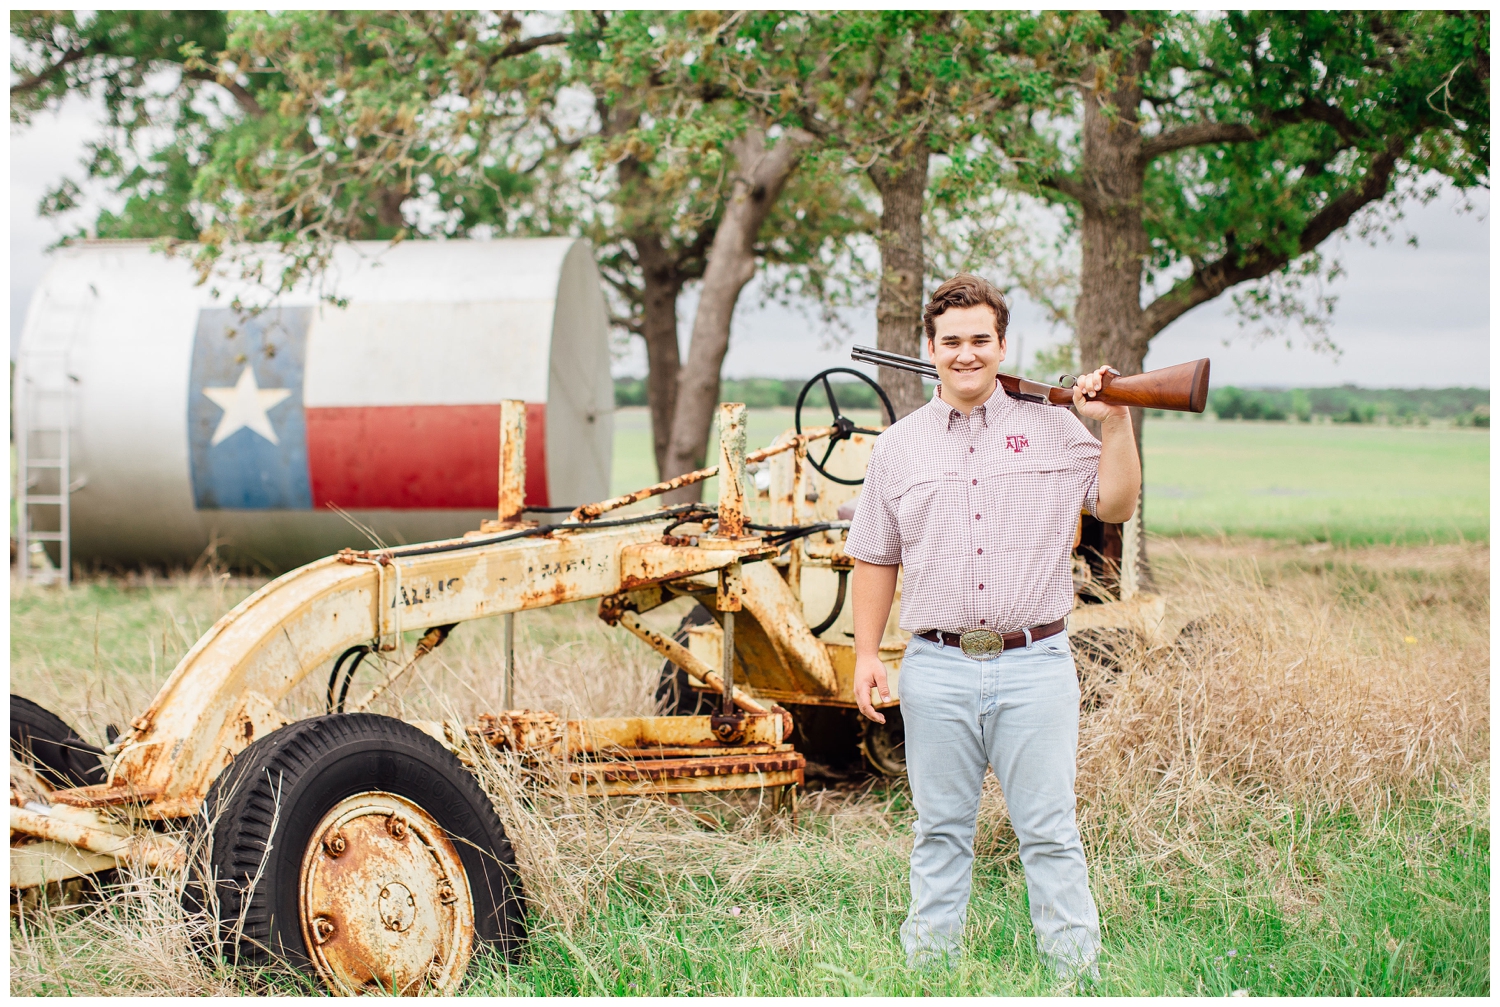 outdoor senior guy pictures with guy standing in front of tractor in jeans, plaid shirt and holding a gun